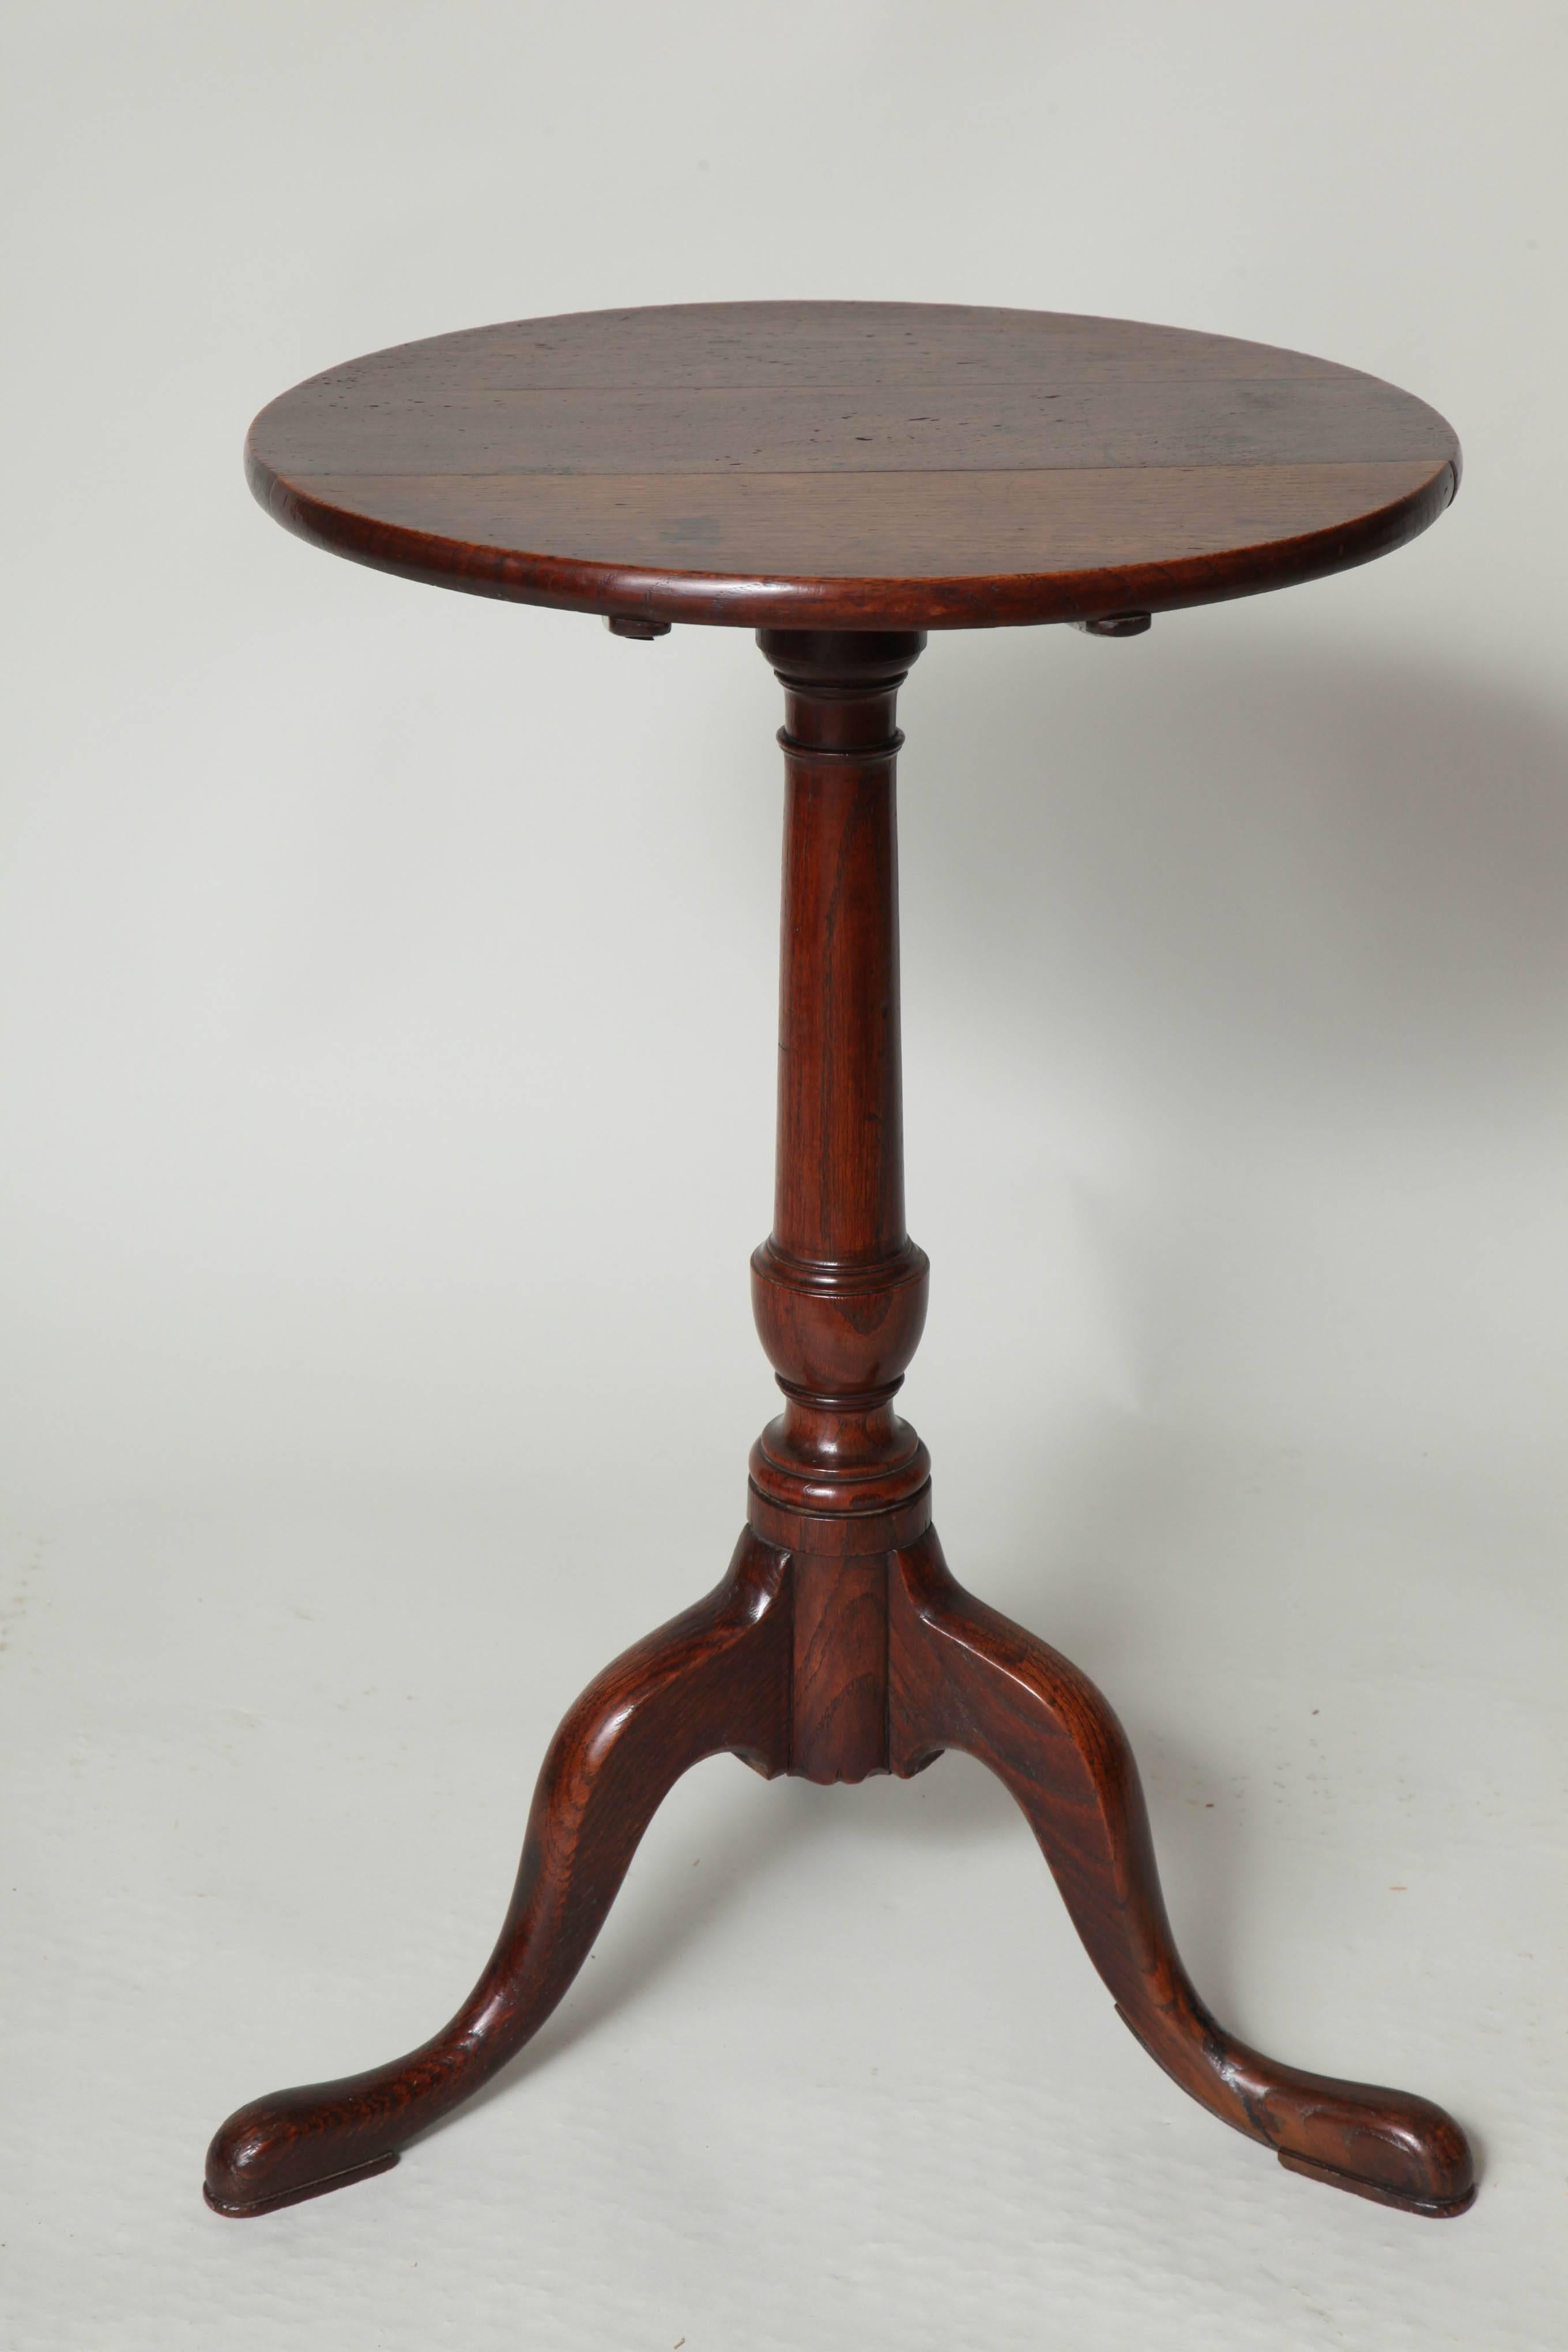 An 18th century English oak tilt-top tripod win table or candle Stand, the turned circular top over a balustrade shaft, standing on three well-formed legs, the whole with pleasing color.